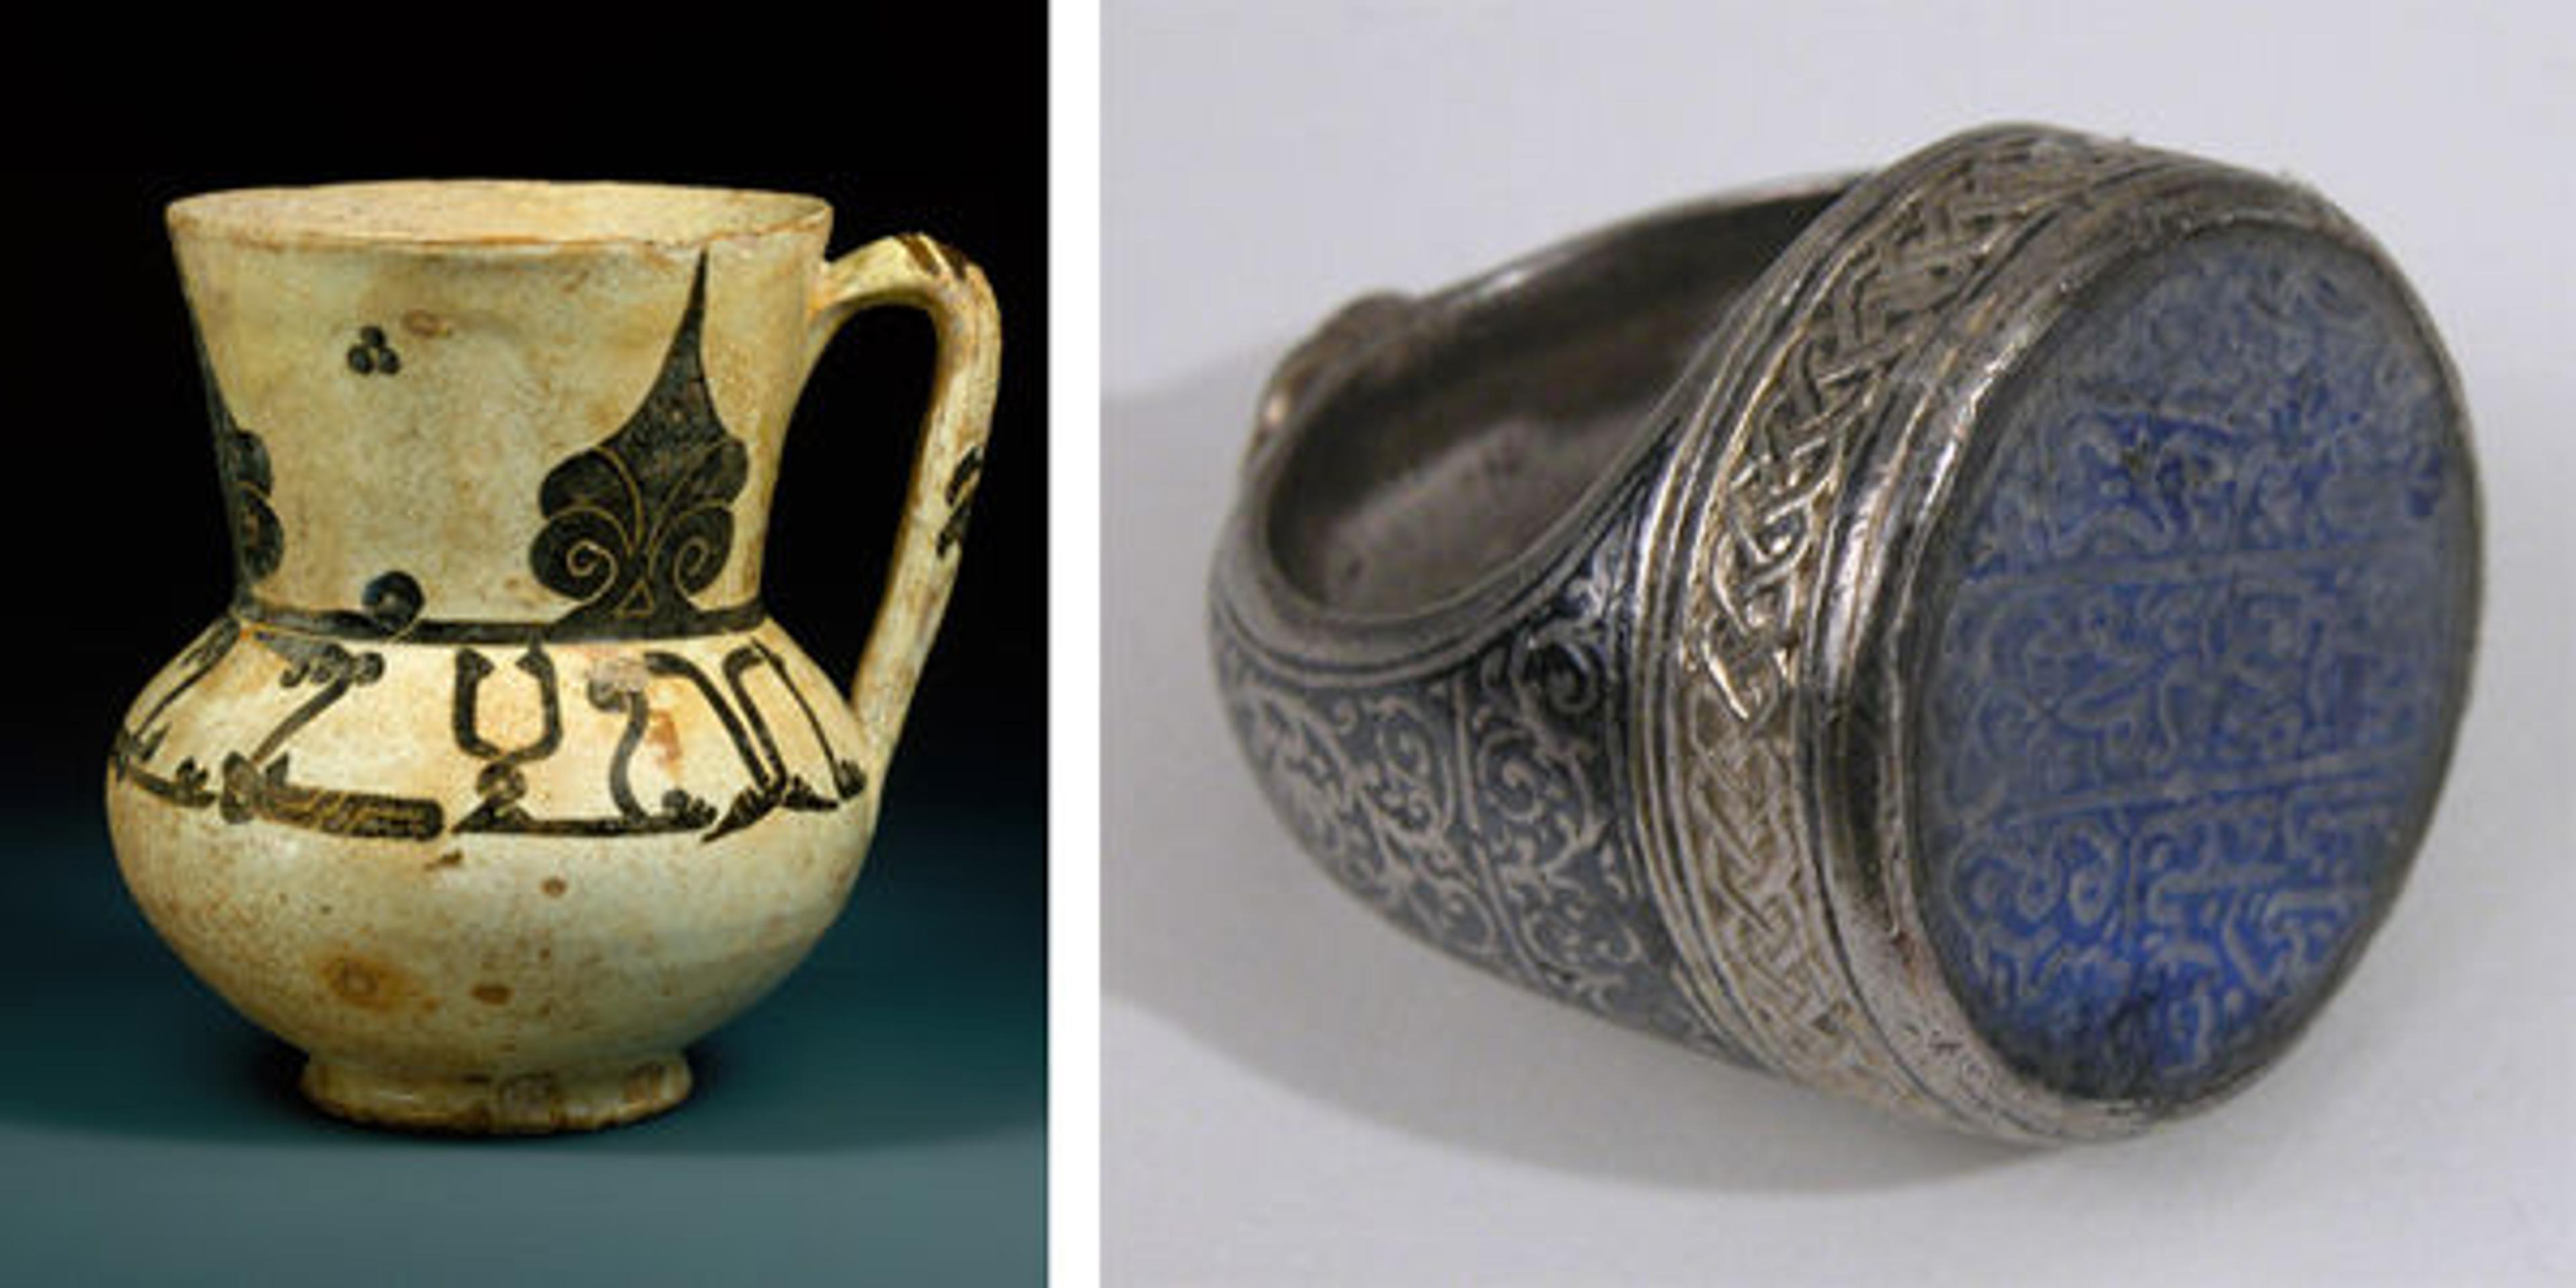 Ewer and ring